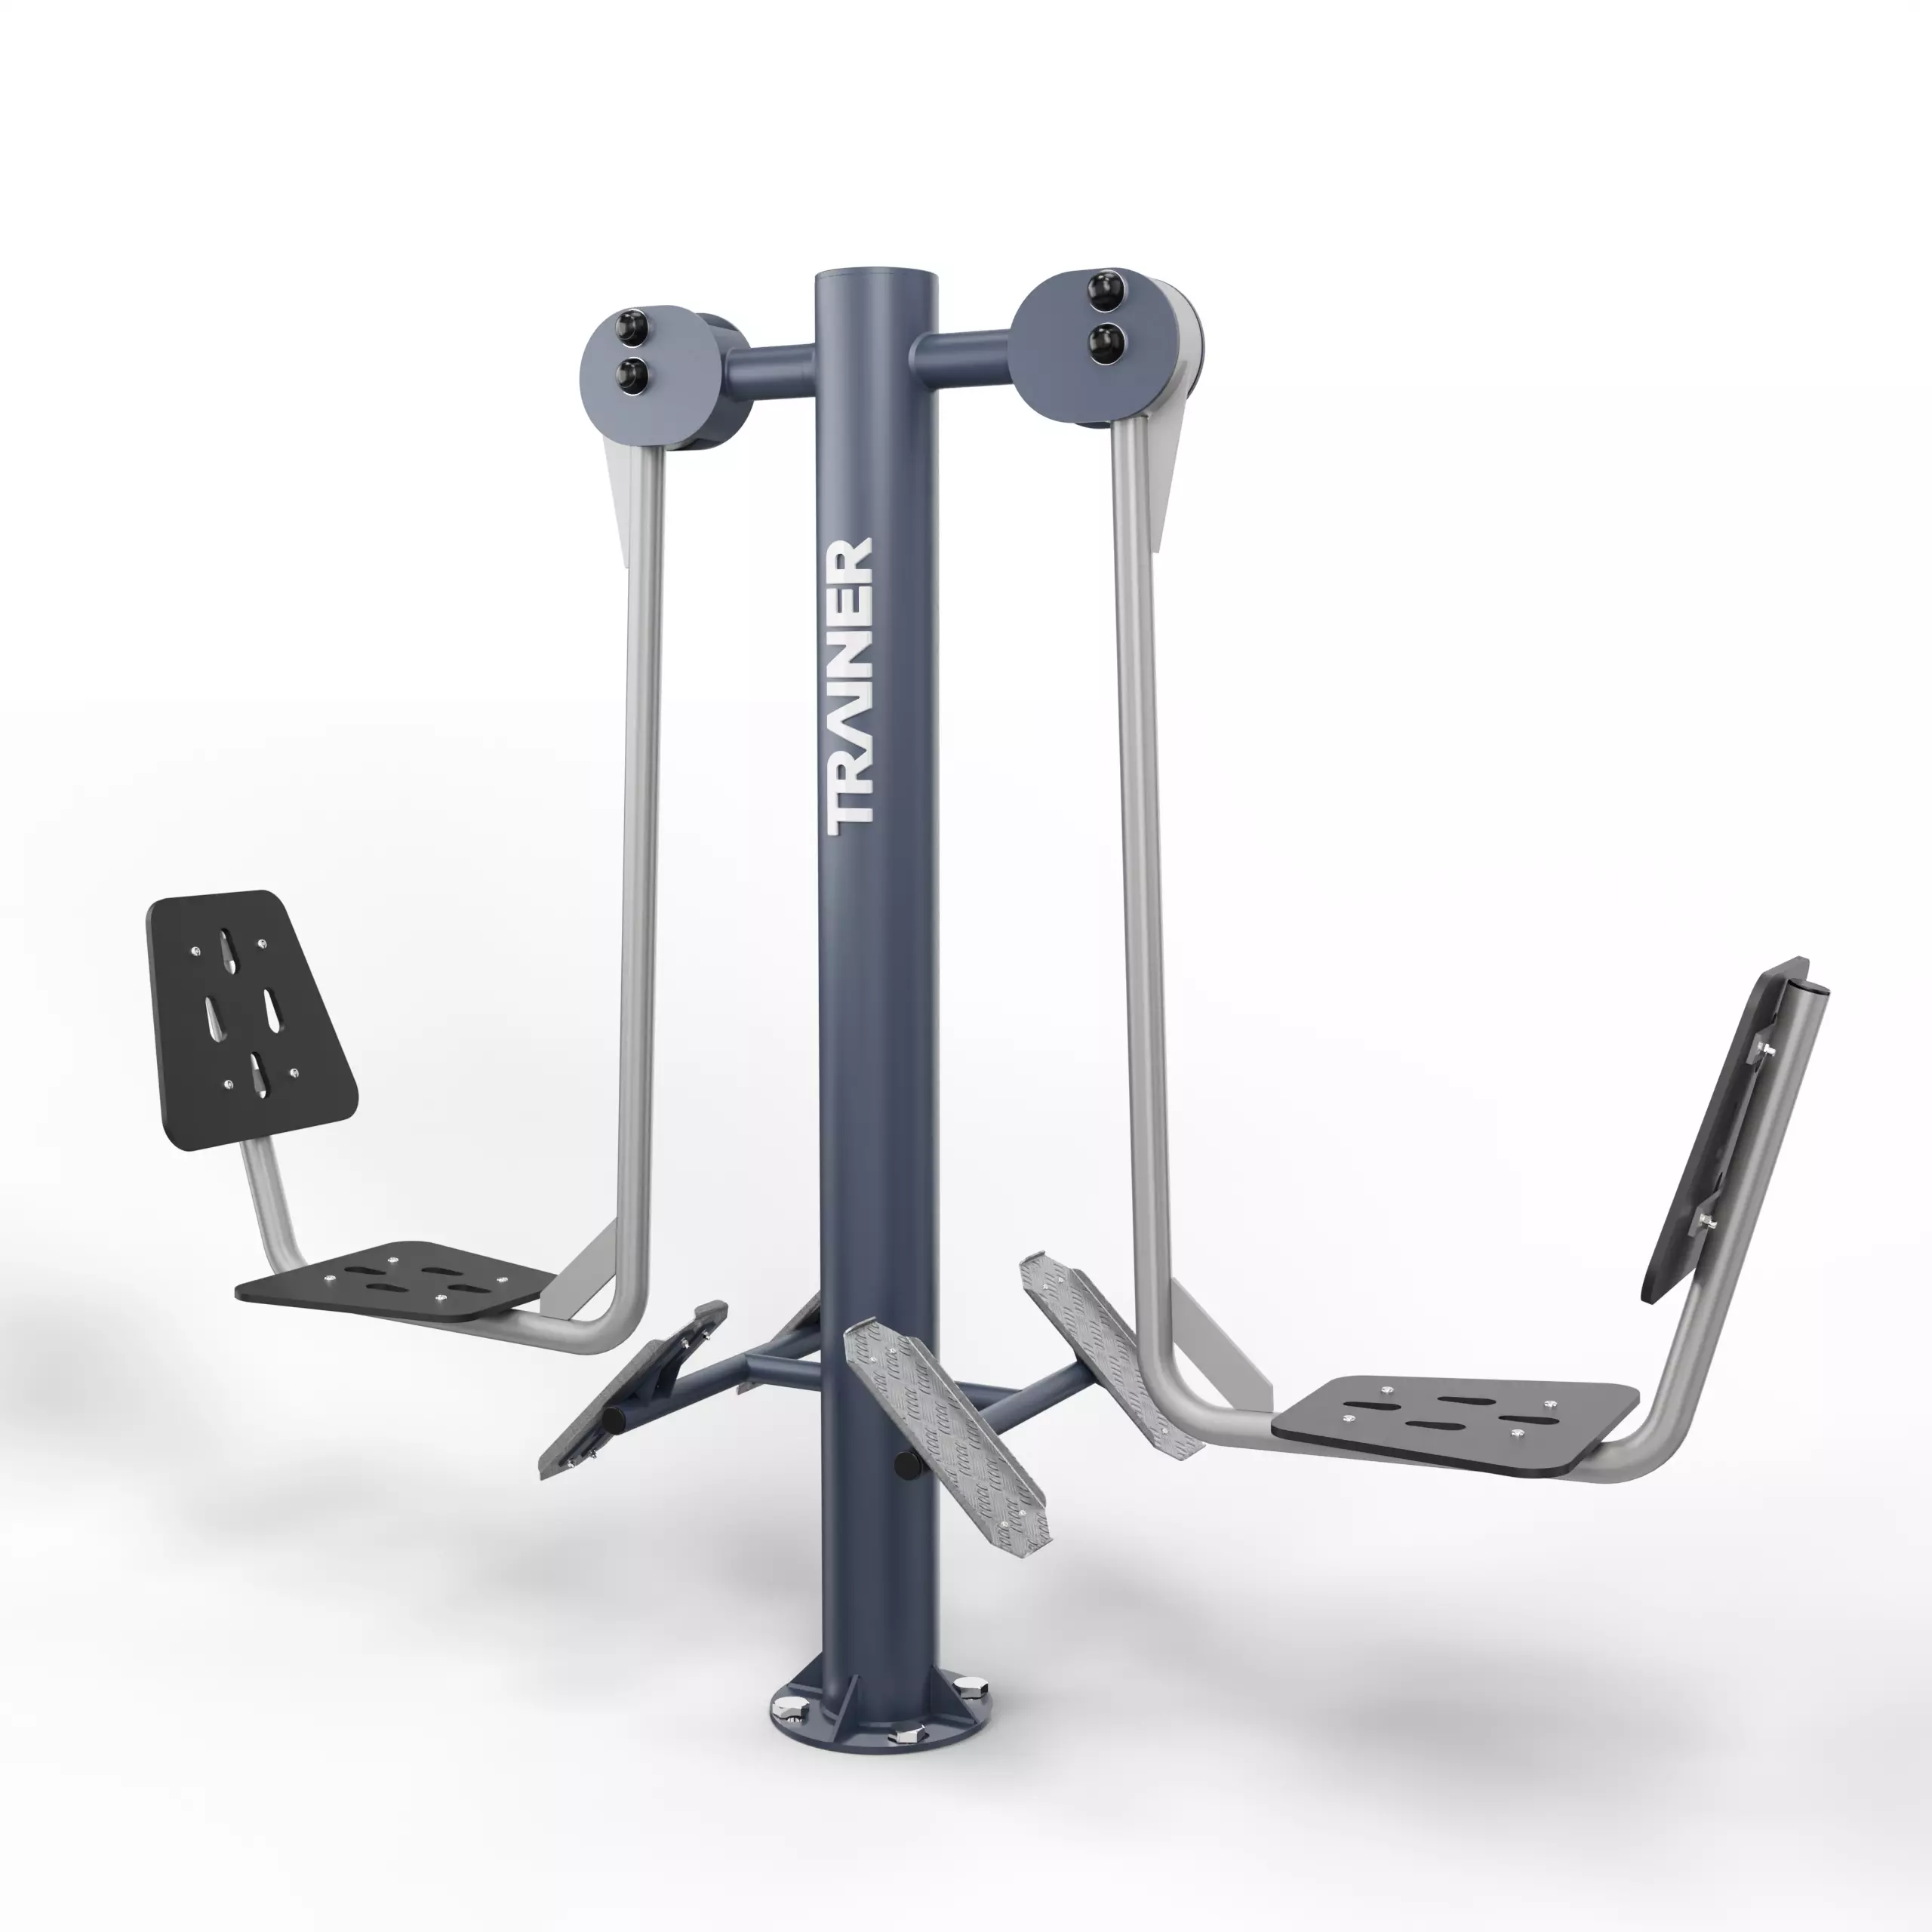 Outdoor fitness equipment of this series